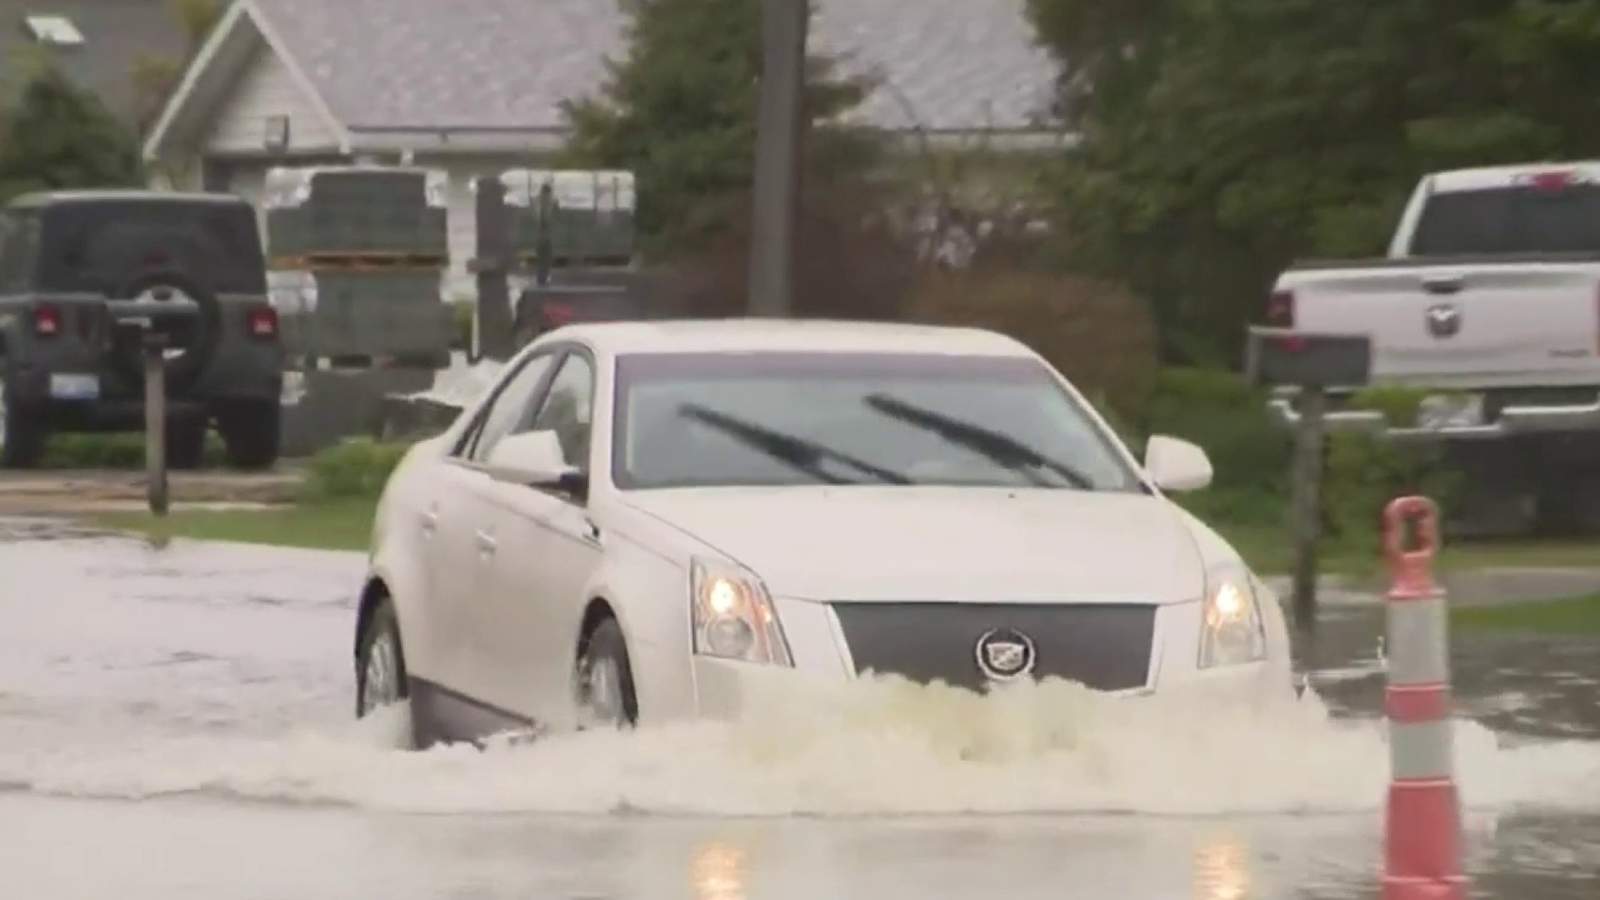 Wayne County officials urge residents, motorists to be cautious due to threat of flooding